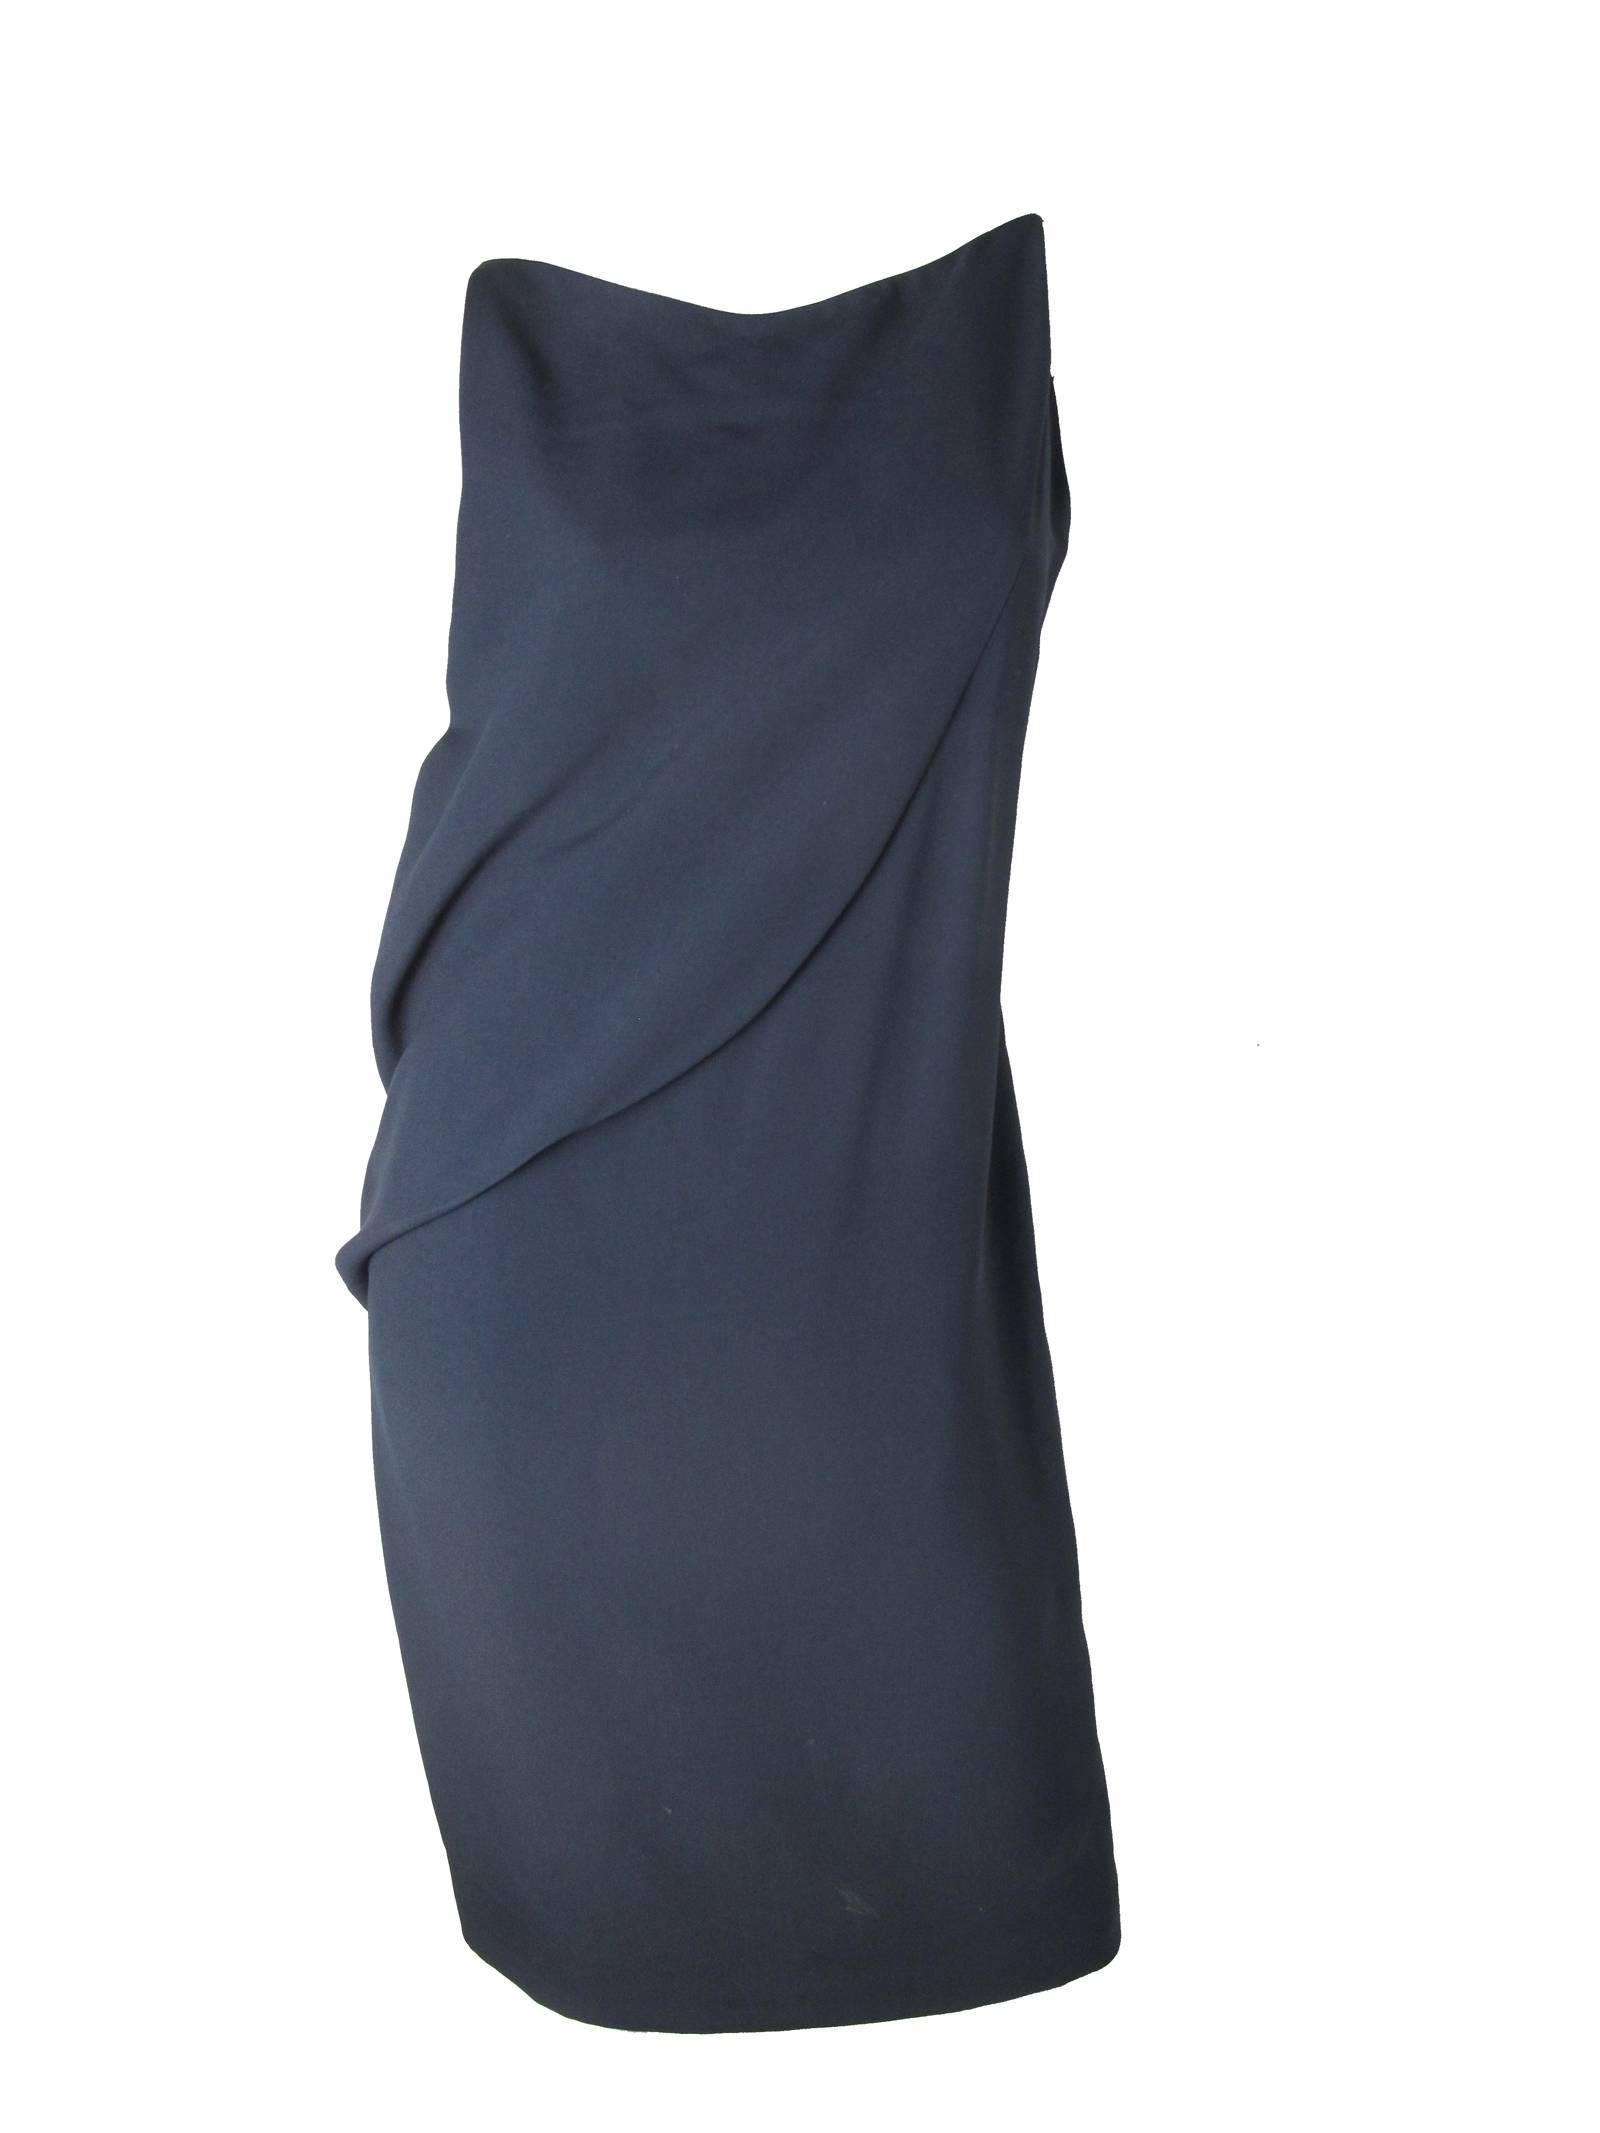 Balenciaga “Le Dix” navy dress, sleeveless.  Silk lined, Acetate and Viscose fabric. Size 42  / US 8 ( mannequin is a size 6 ) 
34